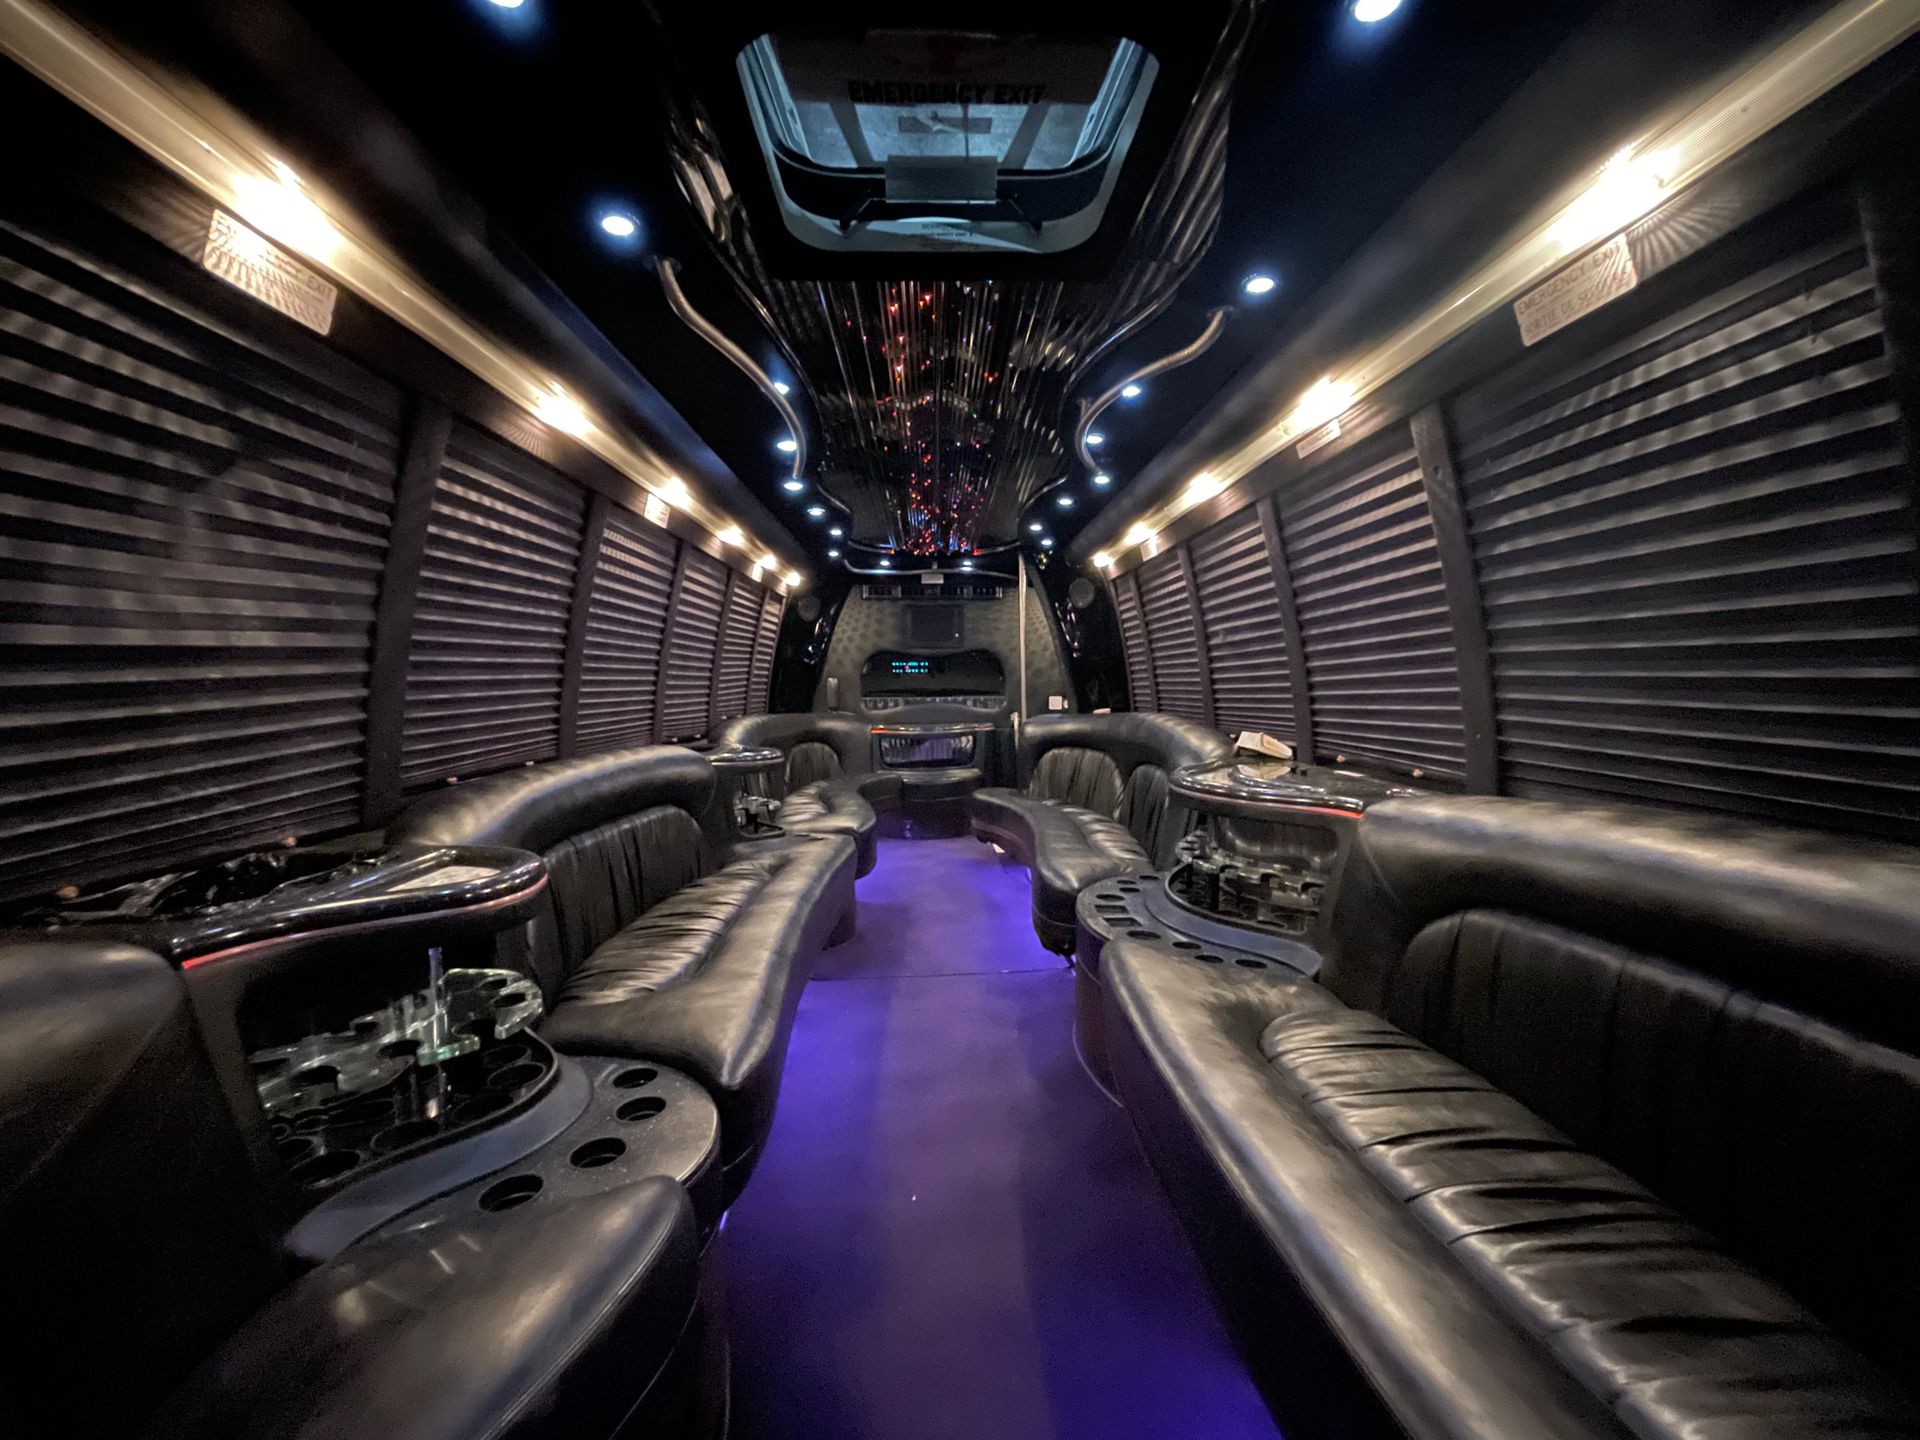 Limo To Go Krystal Coach 24 passenger white party bus interior elegant curved custom seating with underglow and overhead LED starlights